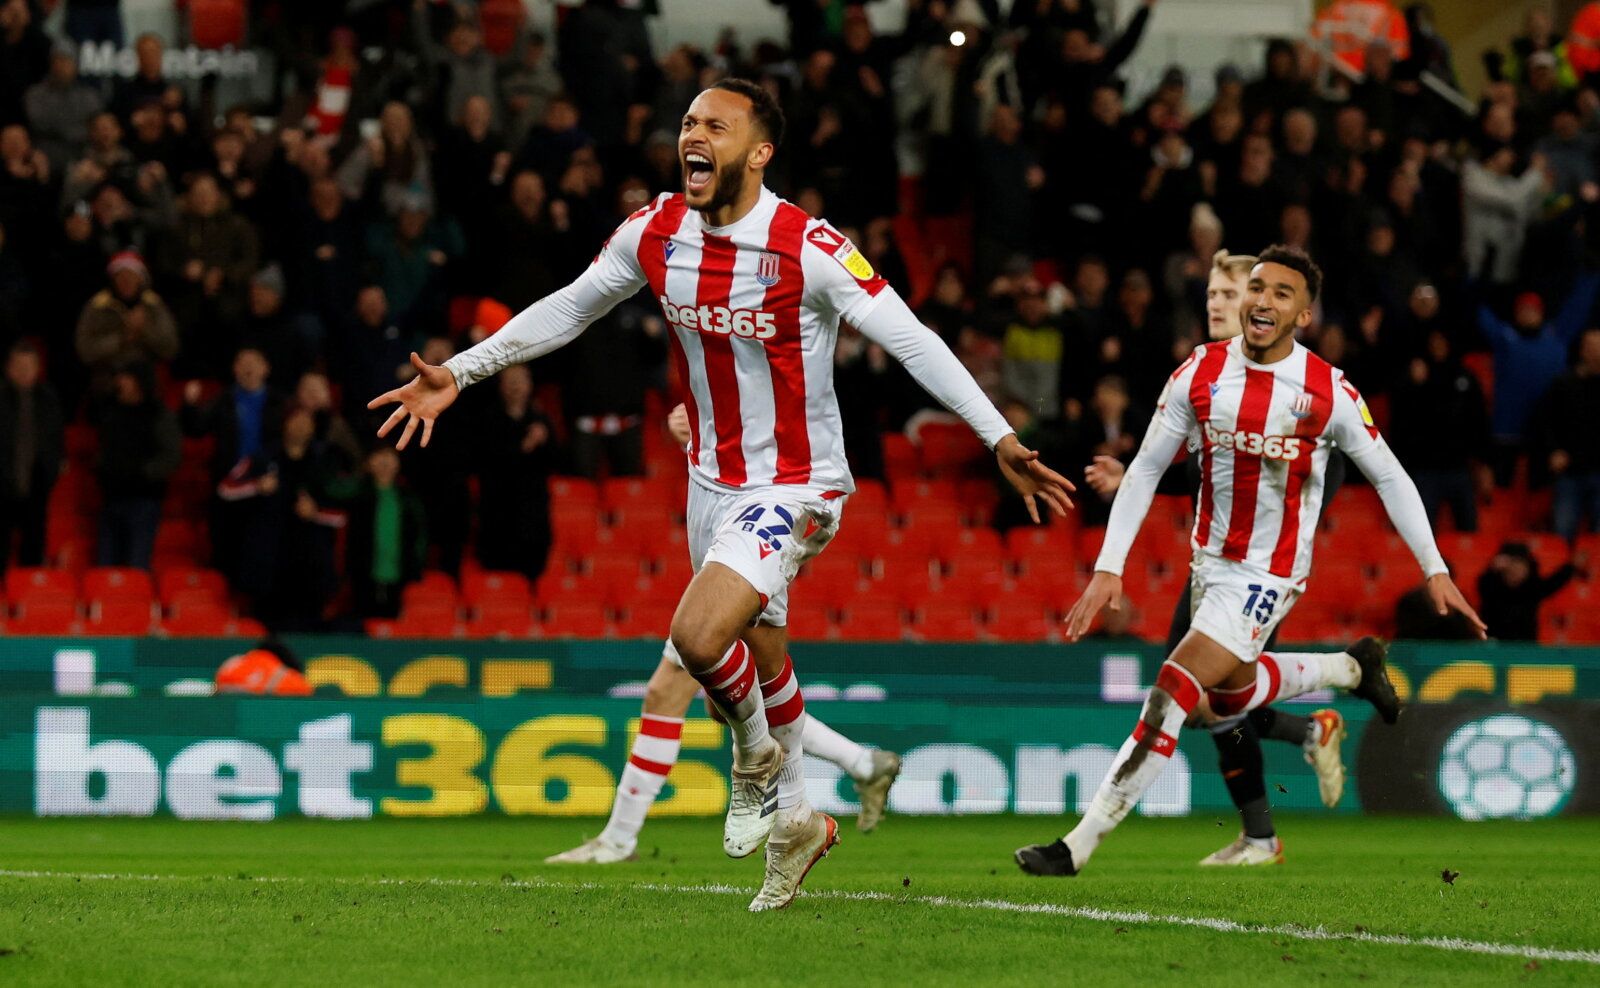 Soccer Football - Championship - Stoke City v Swansea City - bet365 Stadium, Stoke-on-Trent, Britain - February 8, 2022  Stoke City's Lewis Baker celebrates scoring their second goal  Action Images/Jason Cairnduff  EDITORIAL USE ONLY. No use with unauthorized audio, video, data, fixture lists, club/league logos or 